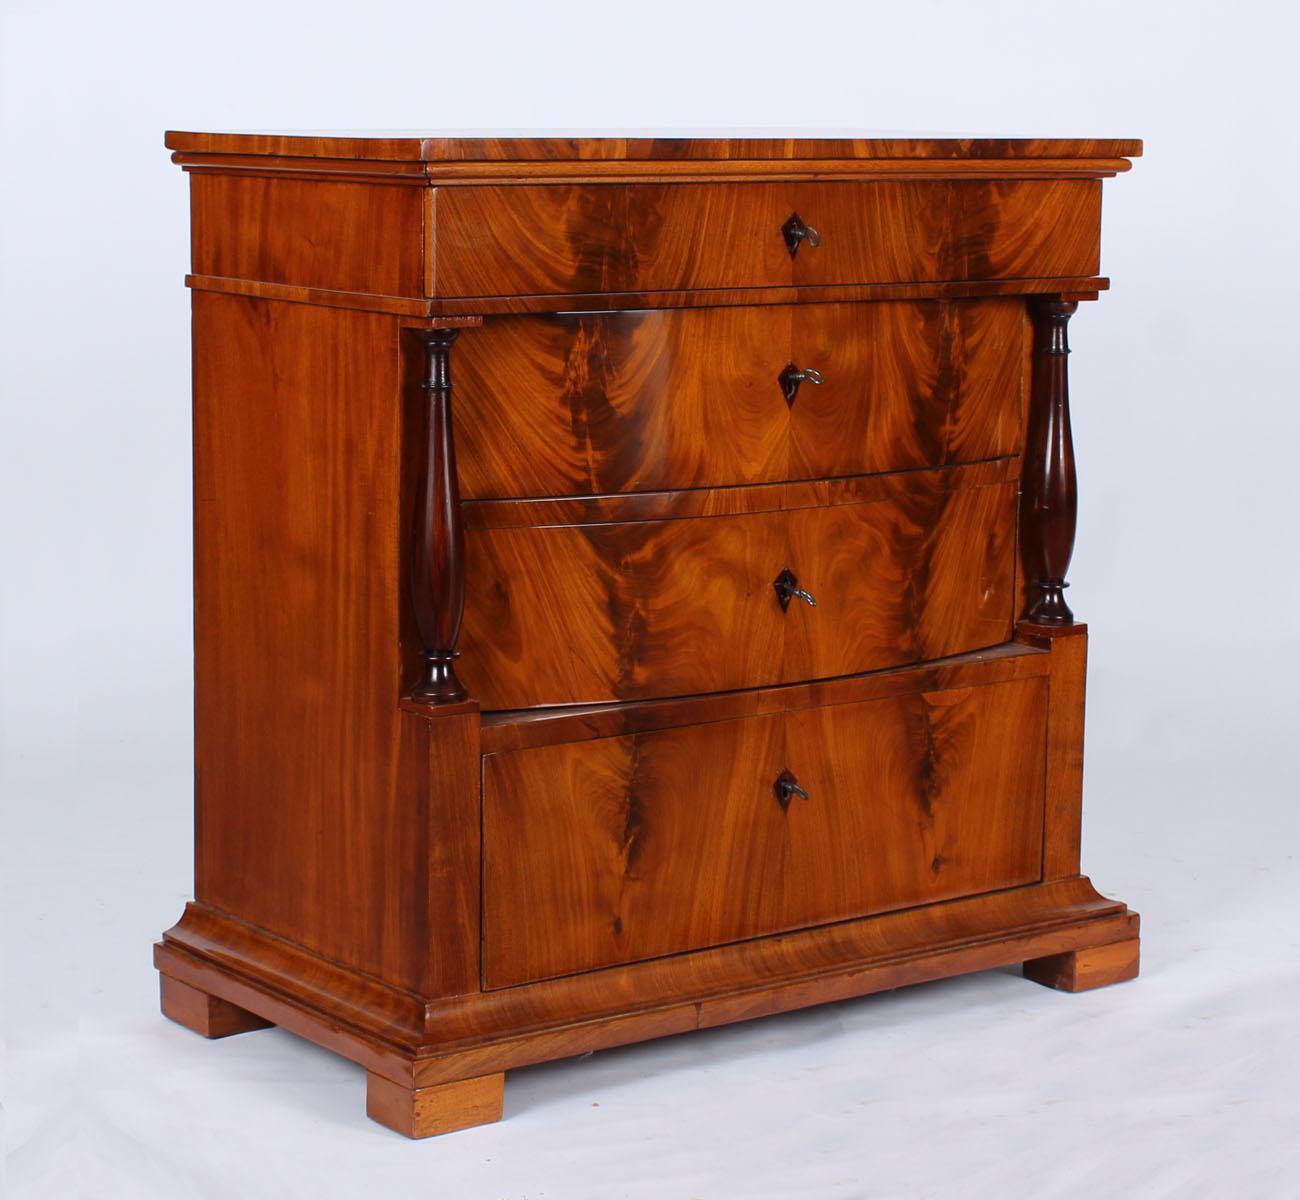 Small antique chest of drawers

Northern Germany
Light colored mahogany
Mid-19th century

Dimensions: H x W x D: 86 x 84 x 45 cm

Description:
This small chest of drawers is standing on massive block feet.
It has a protruding plinth,